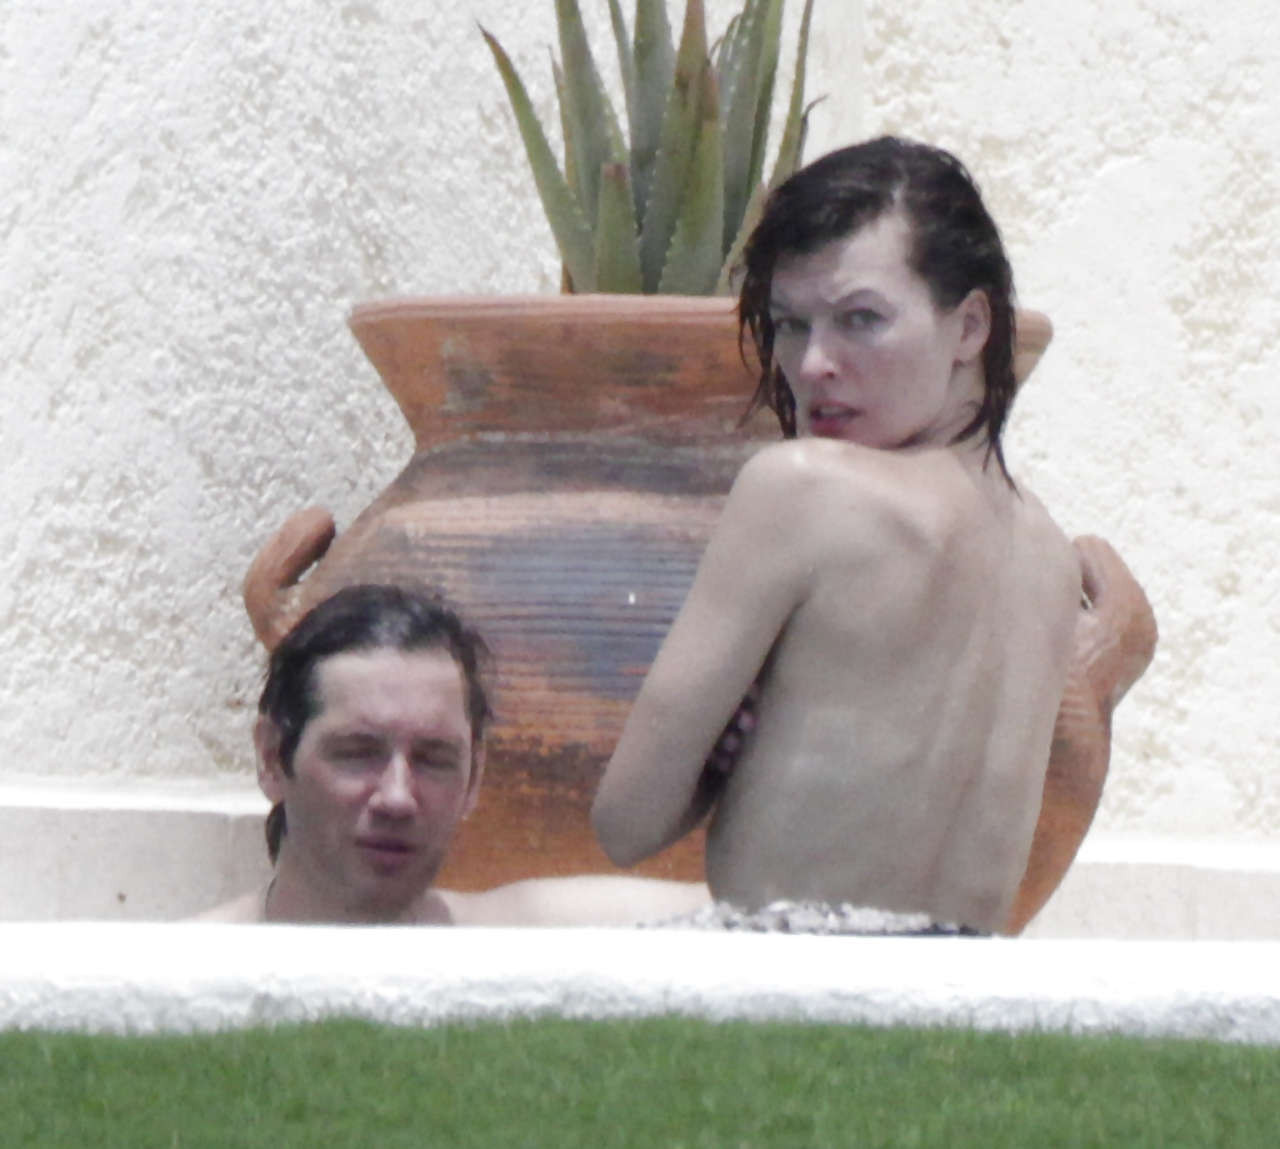 Milla Jovovich caught topless in pool by paparazzi and giving them middle finger #75289802